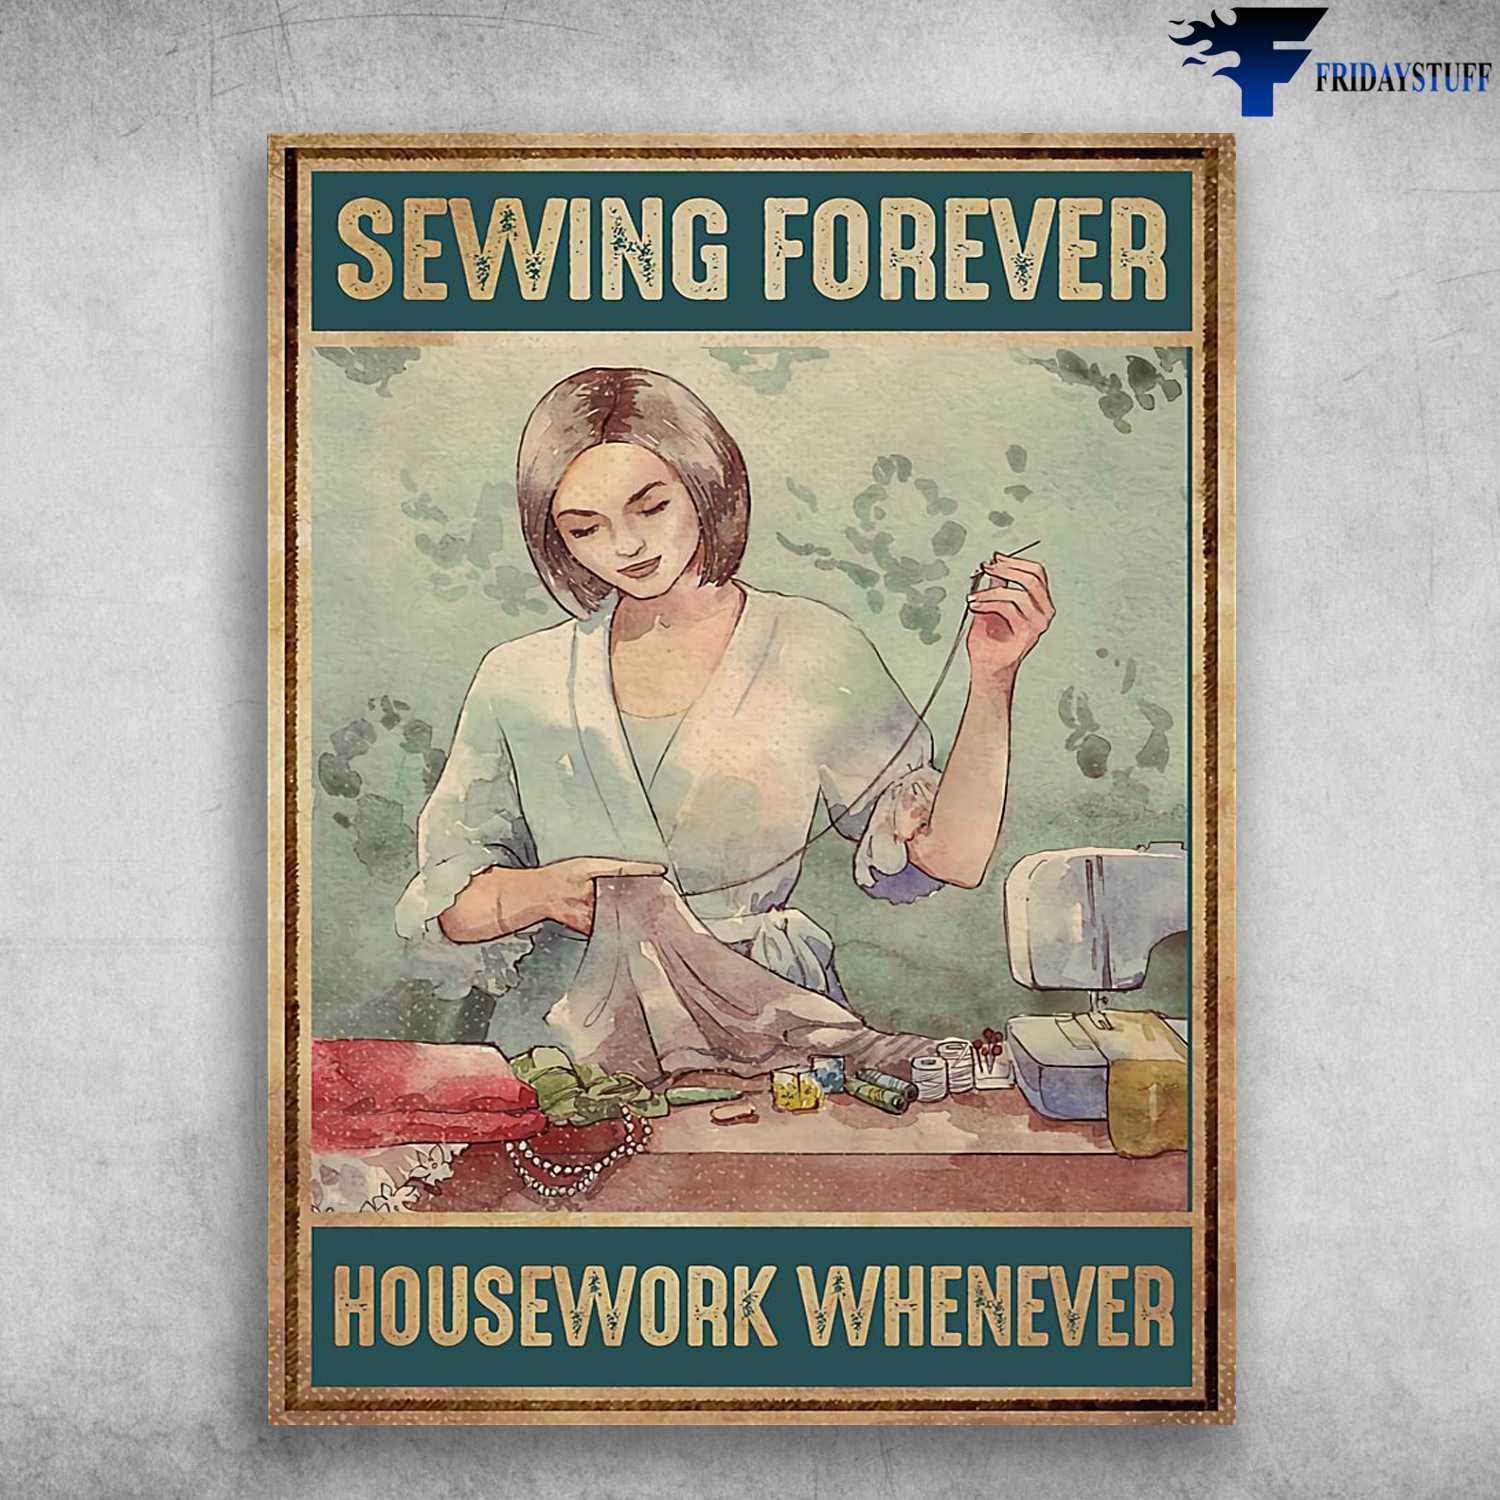 Sewing Girl, Tailor Poster - Sewing Forever, Housework Whenever